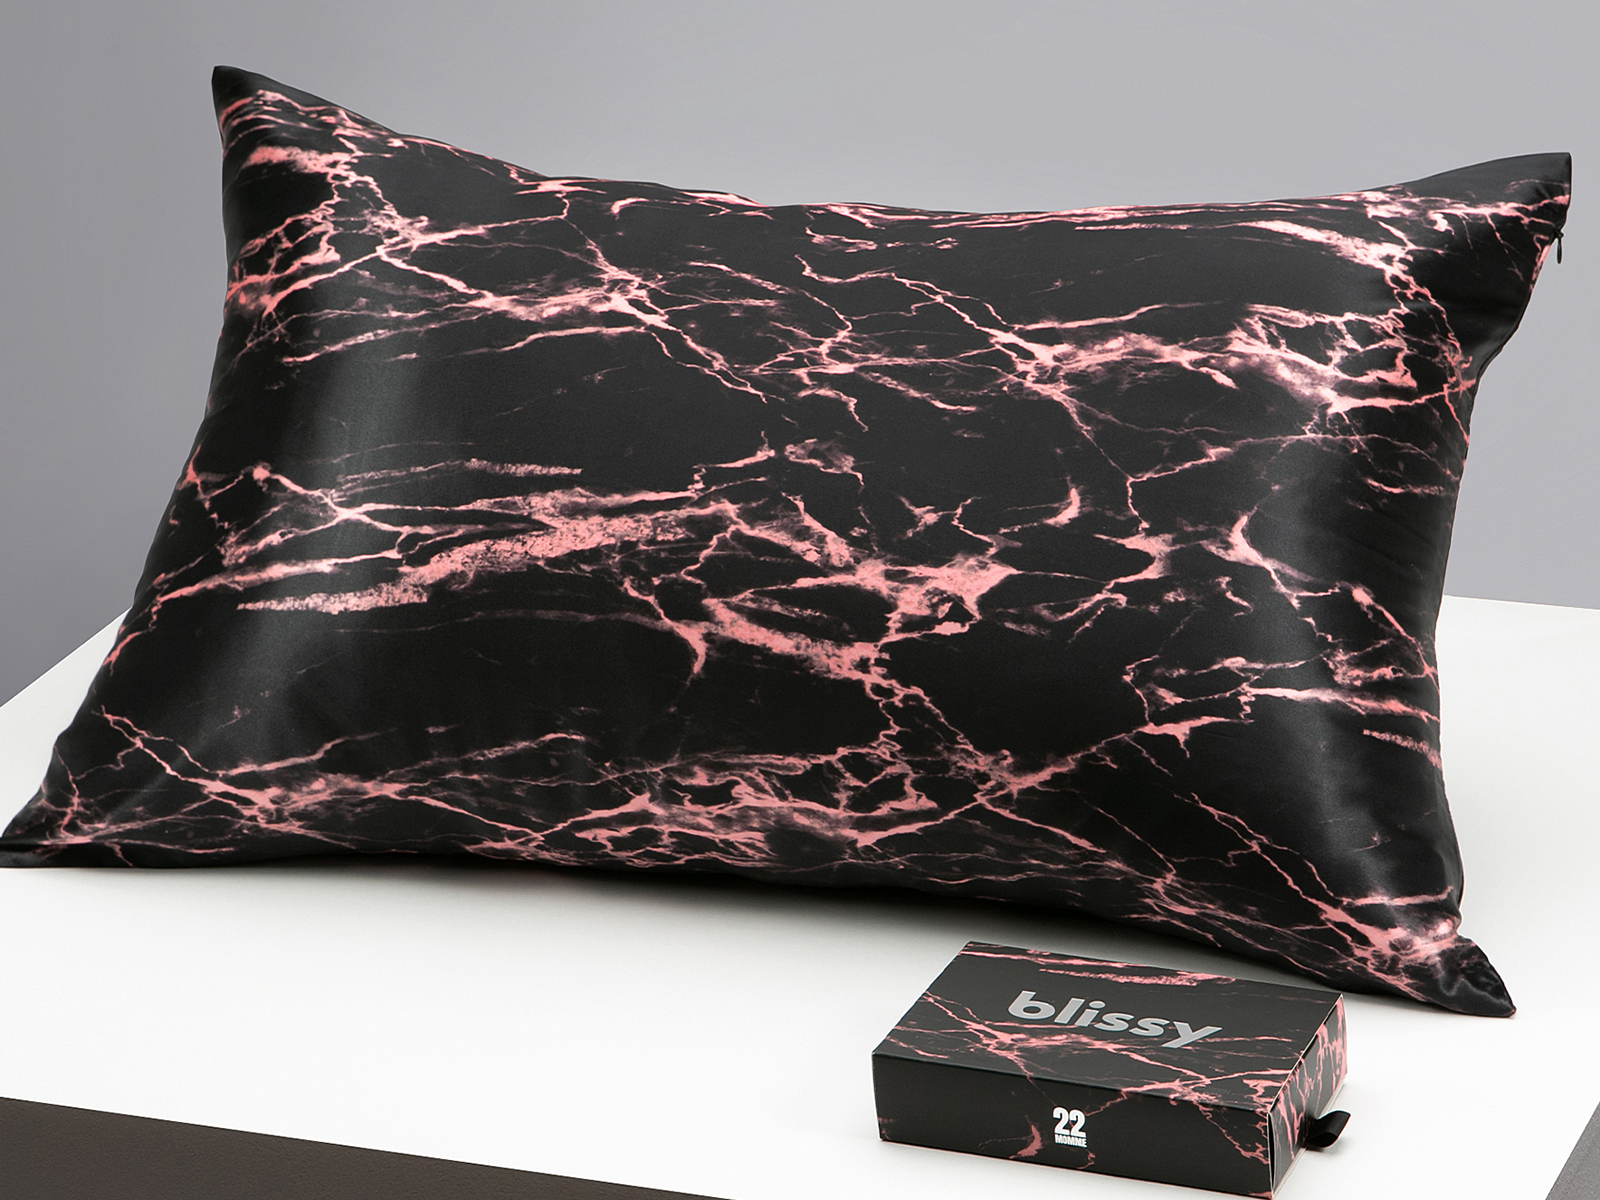 Blissy King 100% Mulberry Silk Pillowcase | Blk Marble